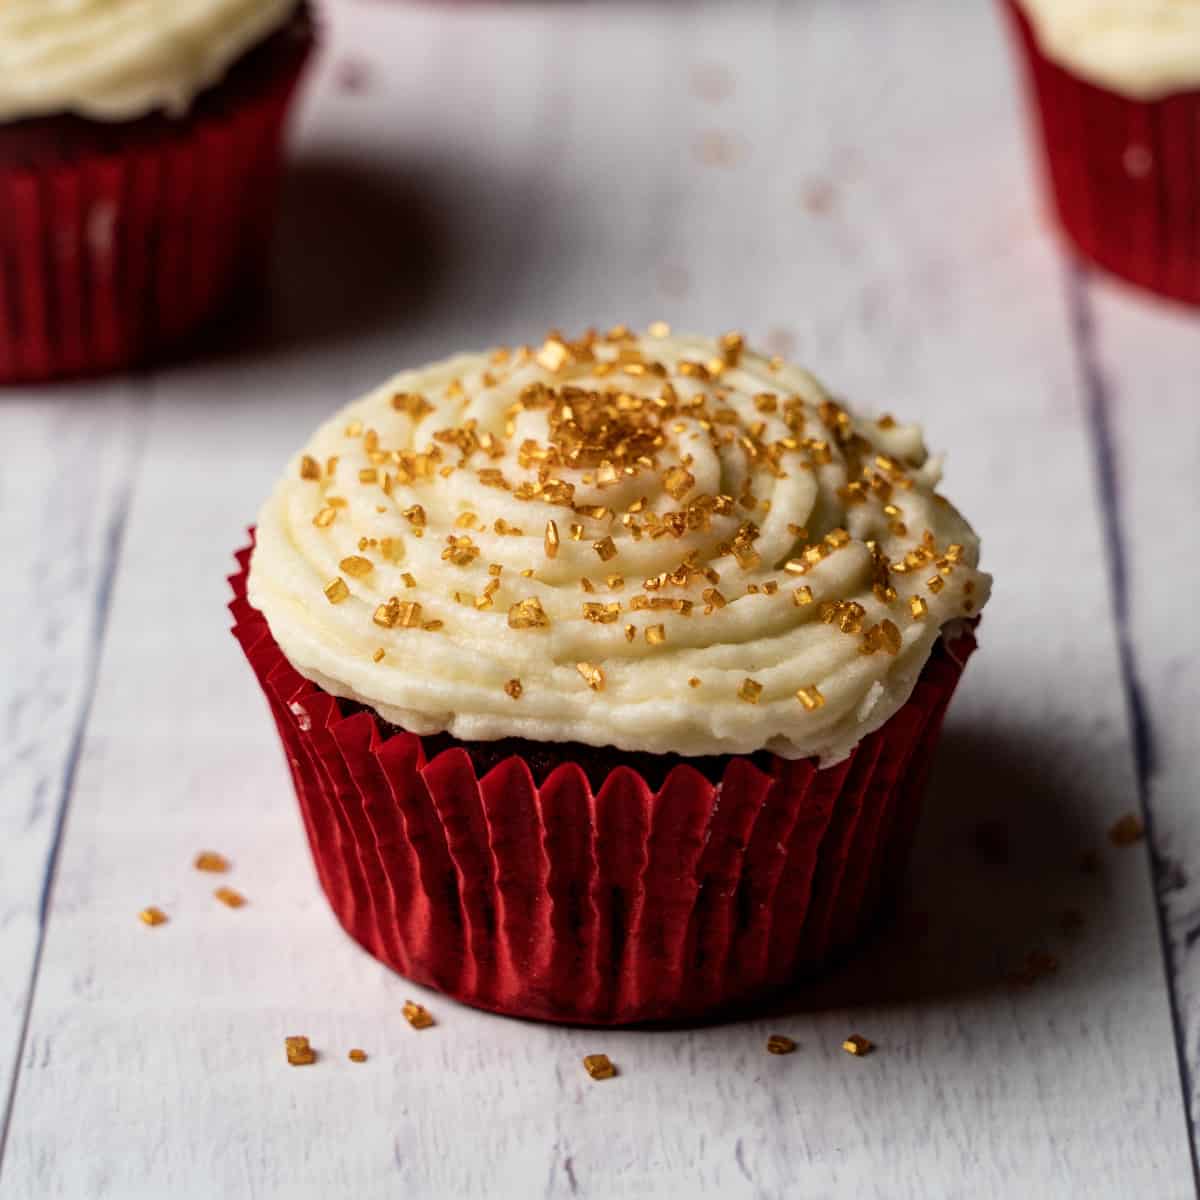 a red velvet cupcake with gold crystal like sprinkles 